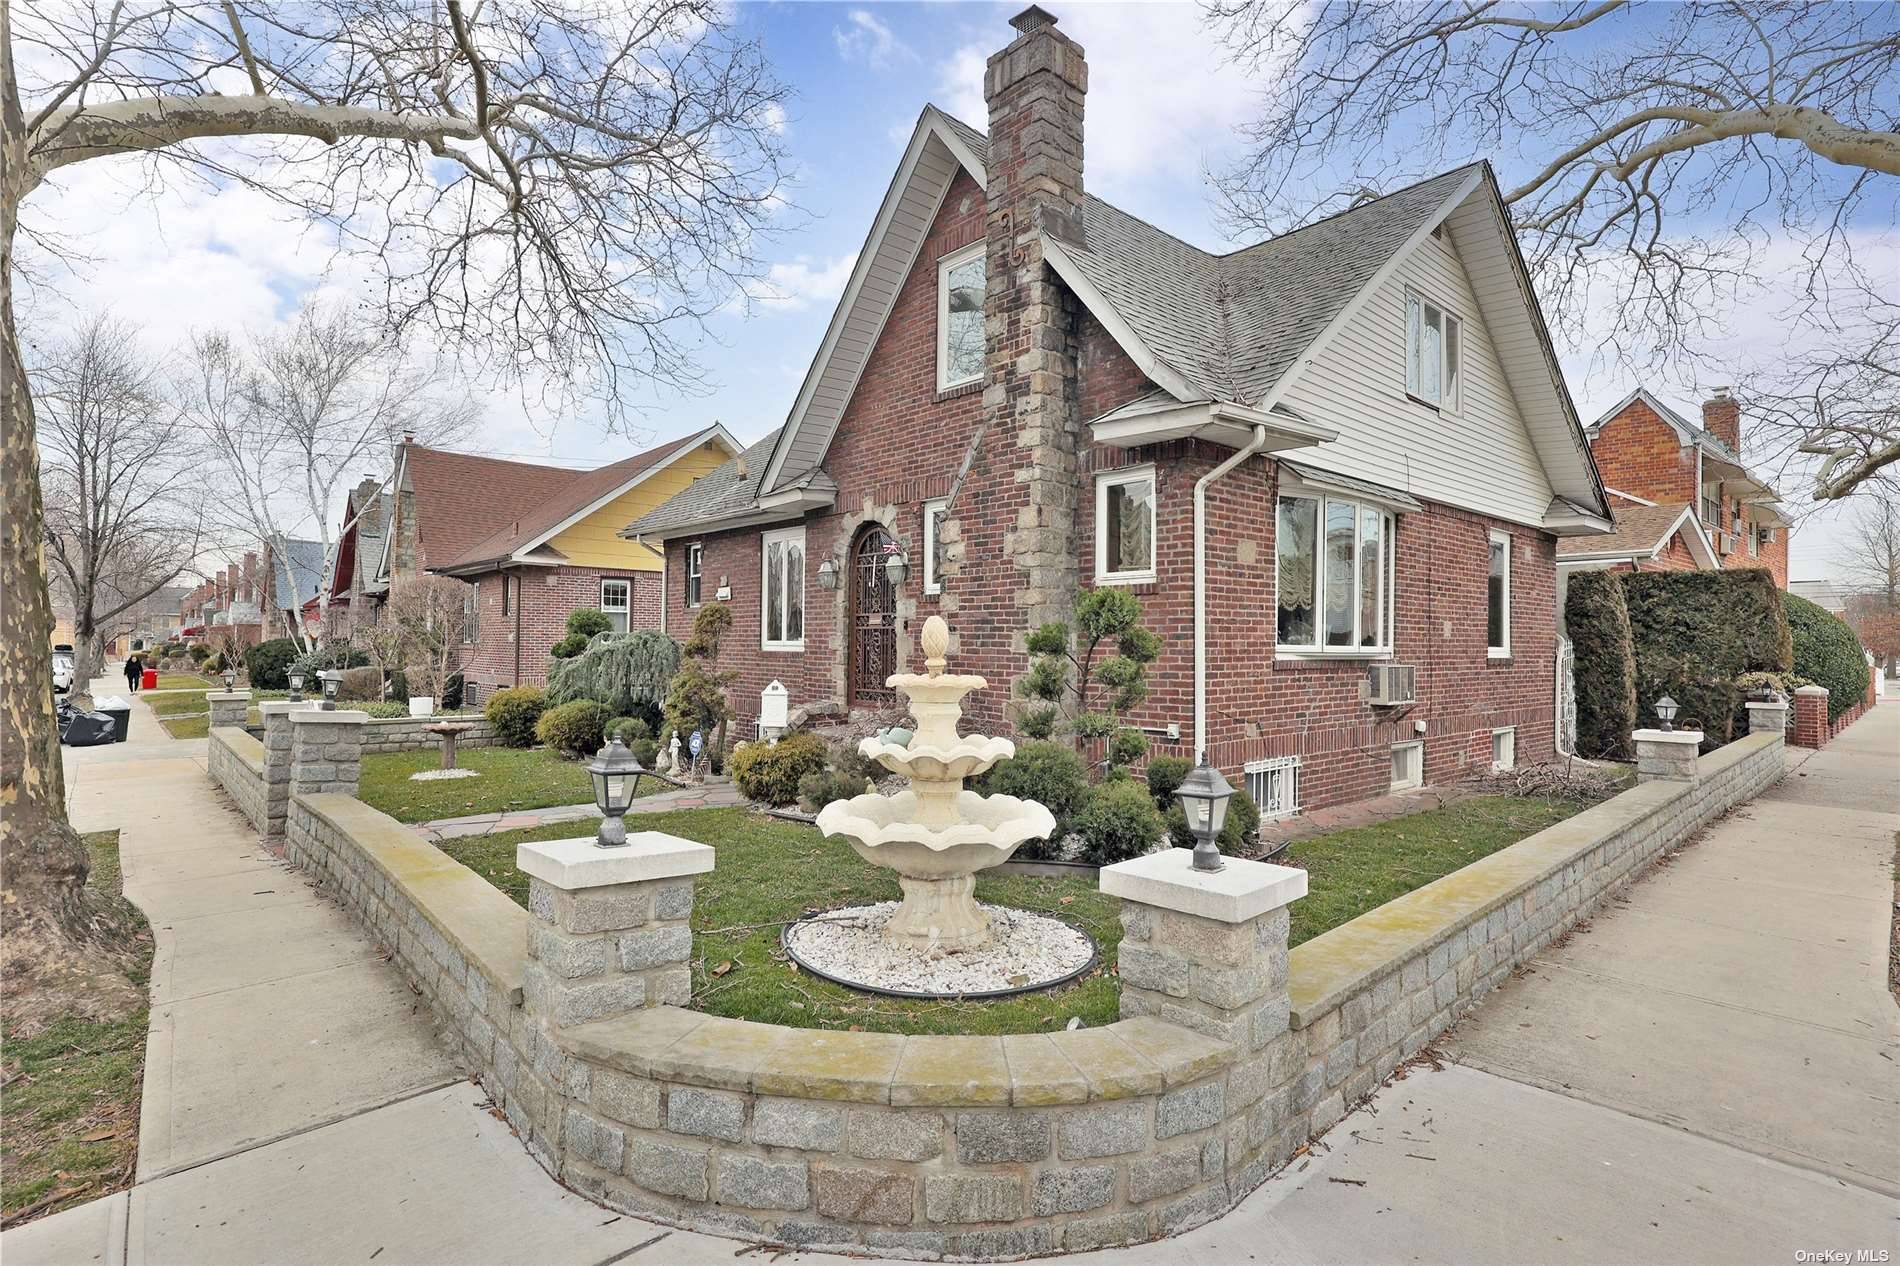 Fully detached, two family brick tudor located in the heart of Middle Village.